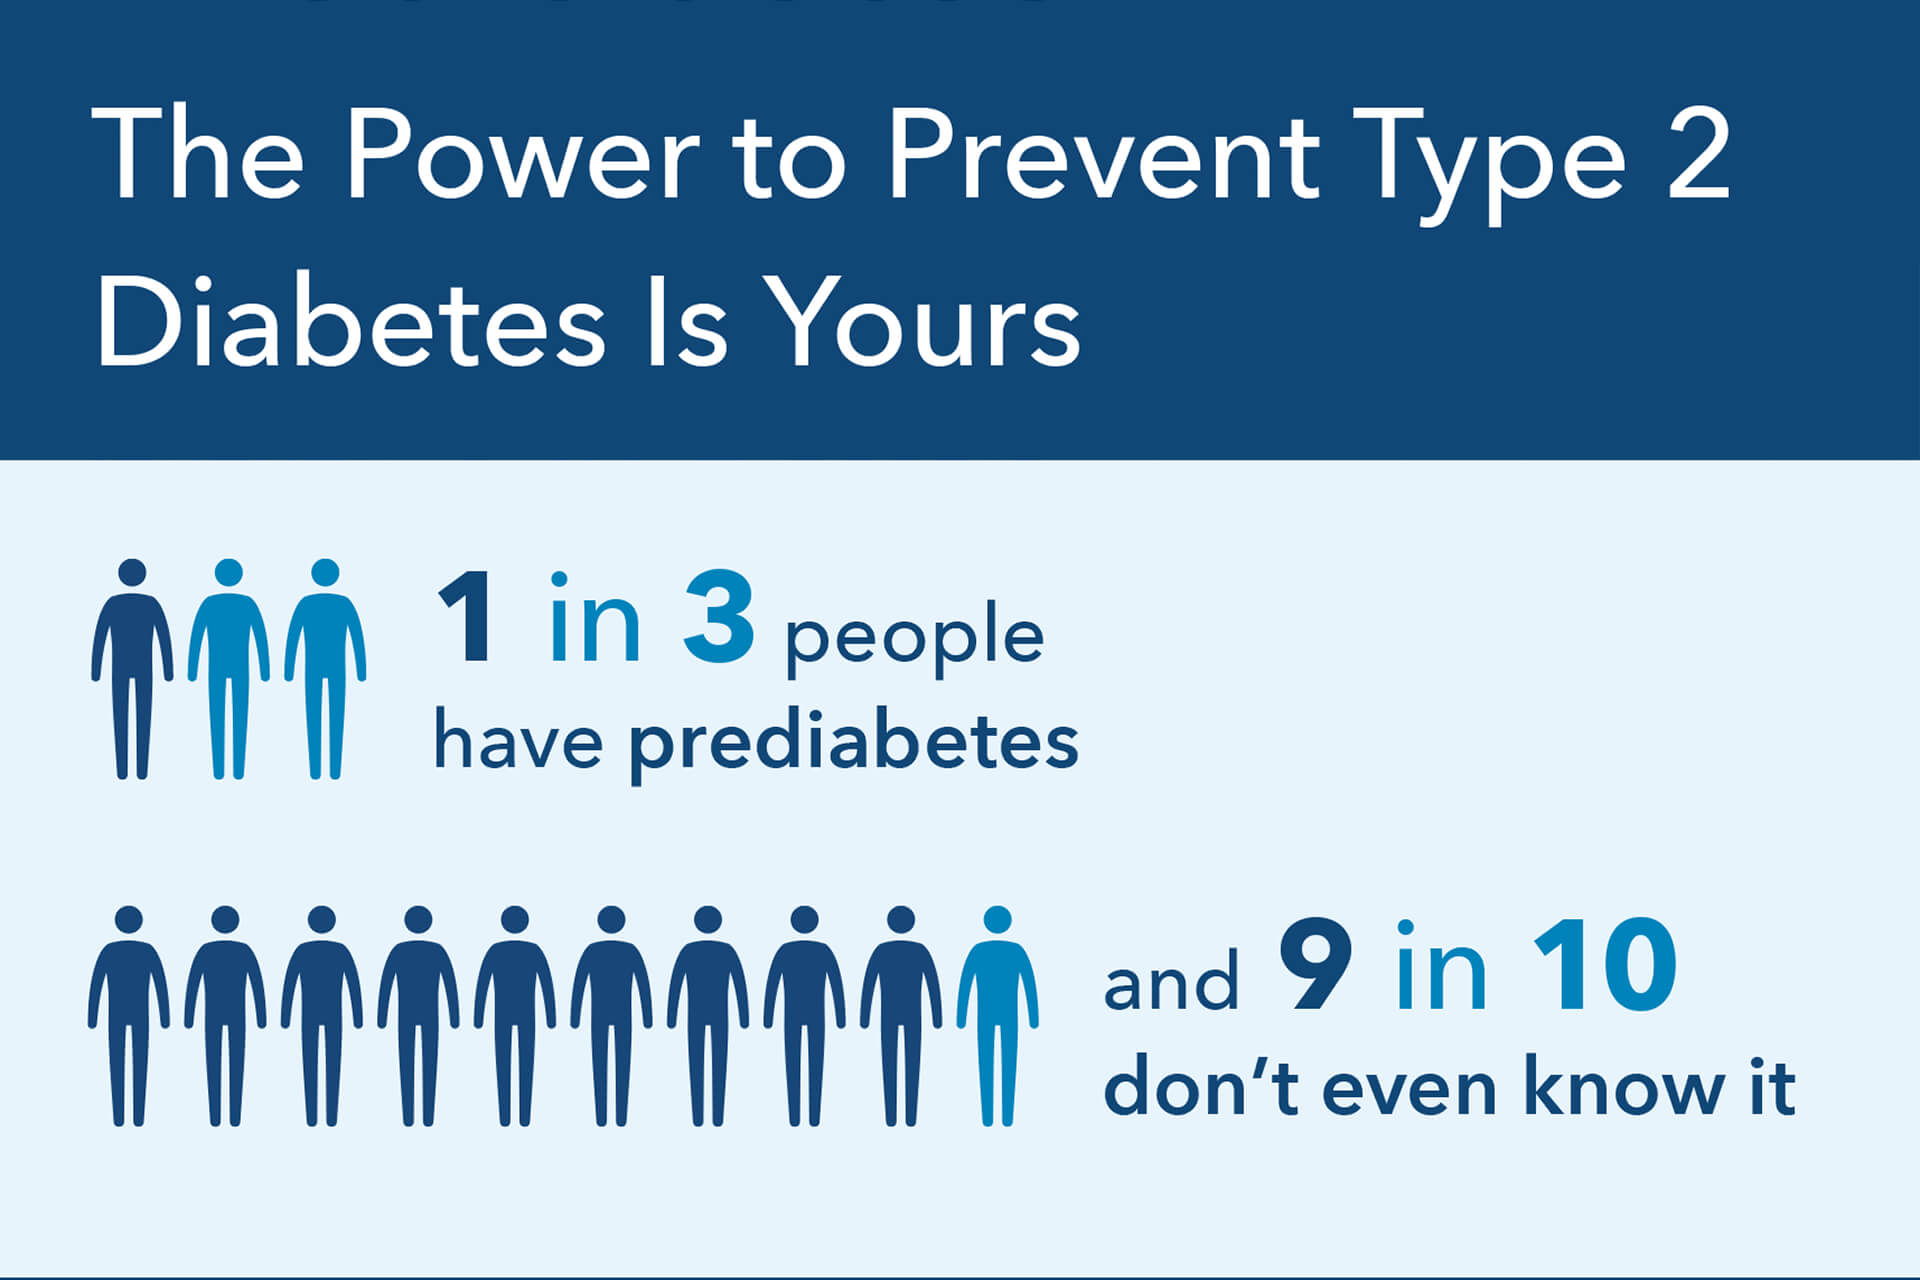 Prediabetes: The Power to Prevent Diabetes Is Yours